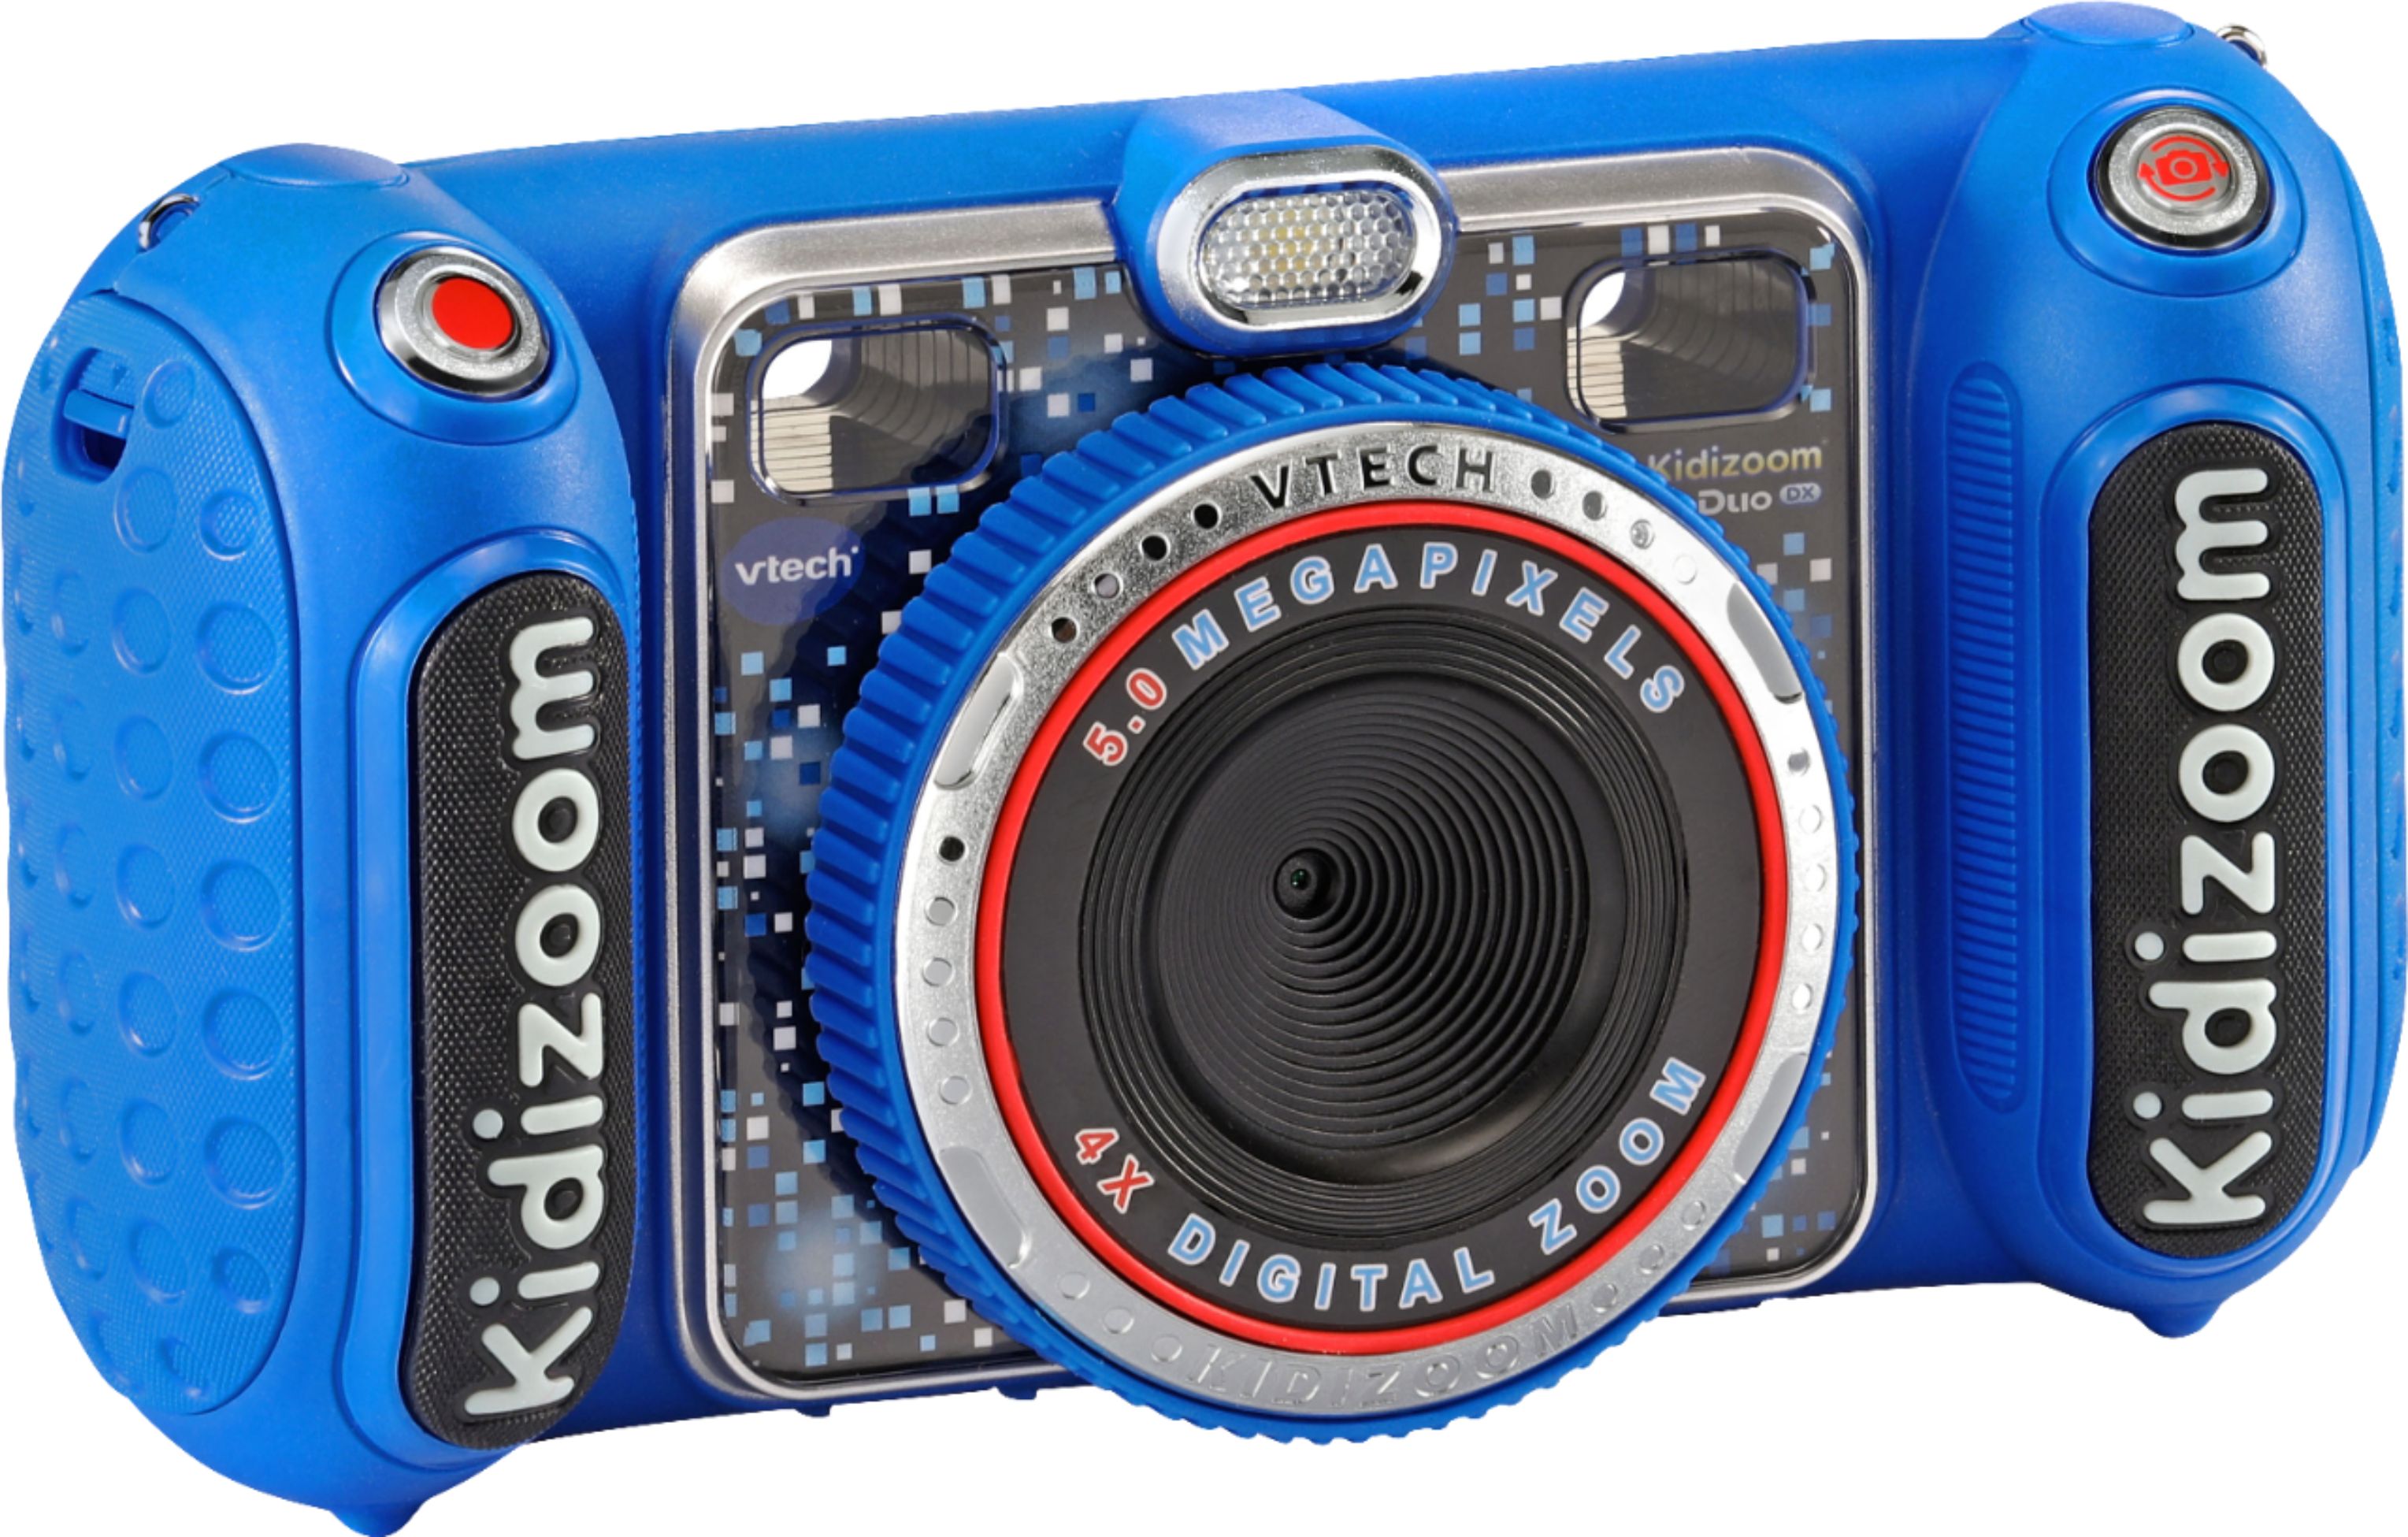 VTech Kidizoom Duo DX Digital Selfie Camera 5mp With Mp3 Player A14 for sale online 